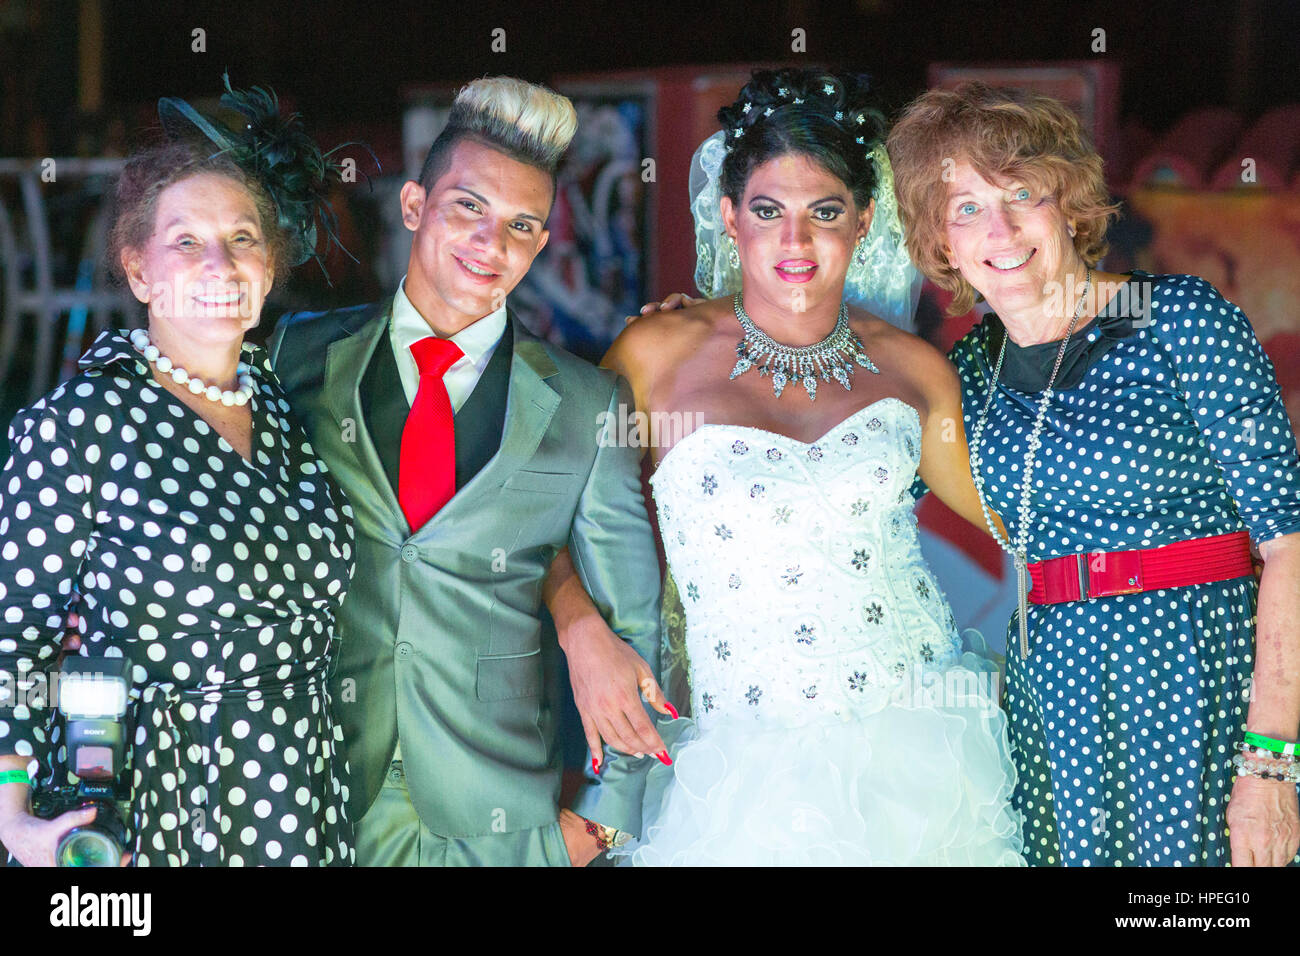 Mariette Pathy Allen (left), an American photographer, who has been photographing transgender women in Cuba since 2013 posing with a newlywed couple a Stock Photo